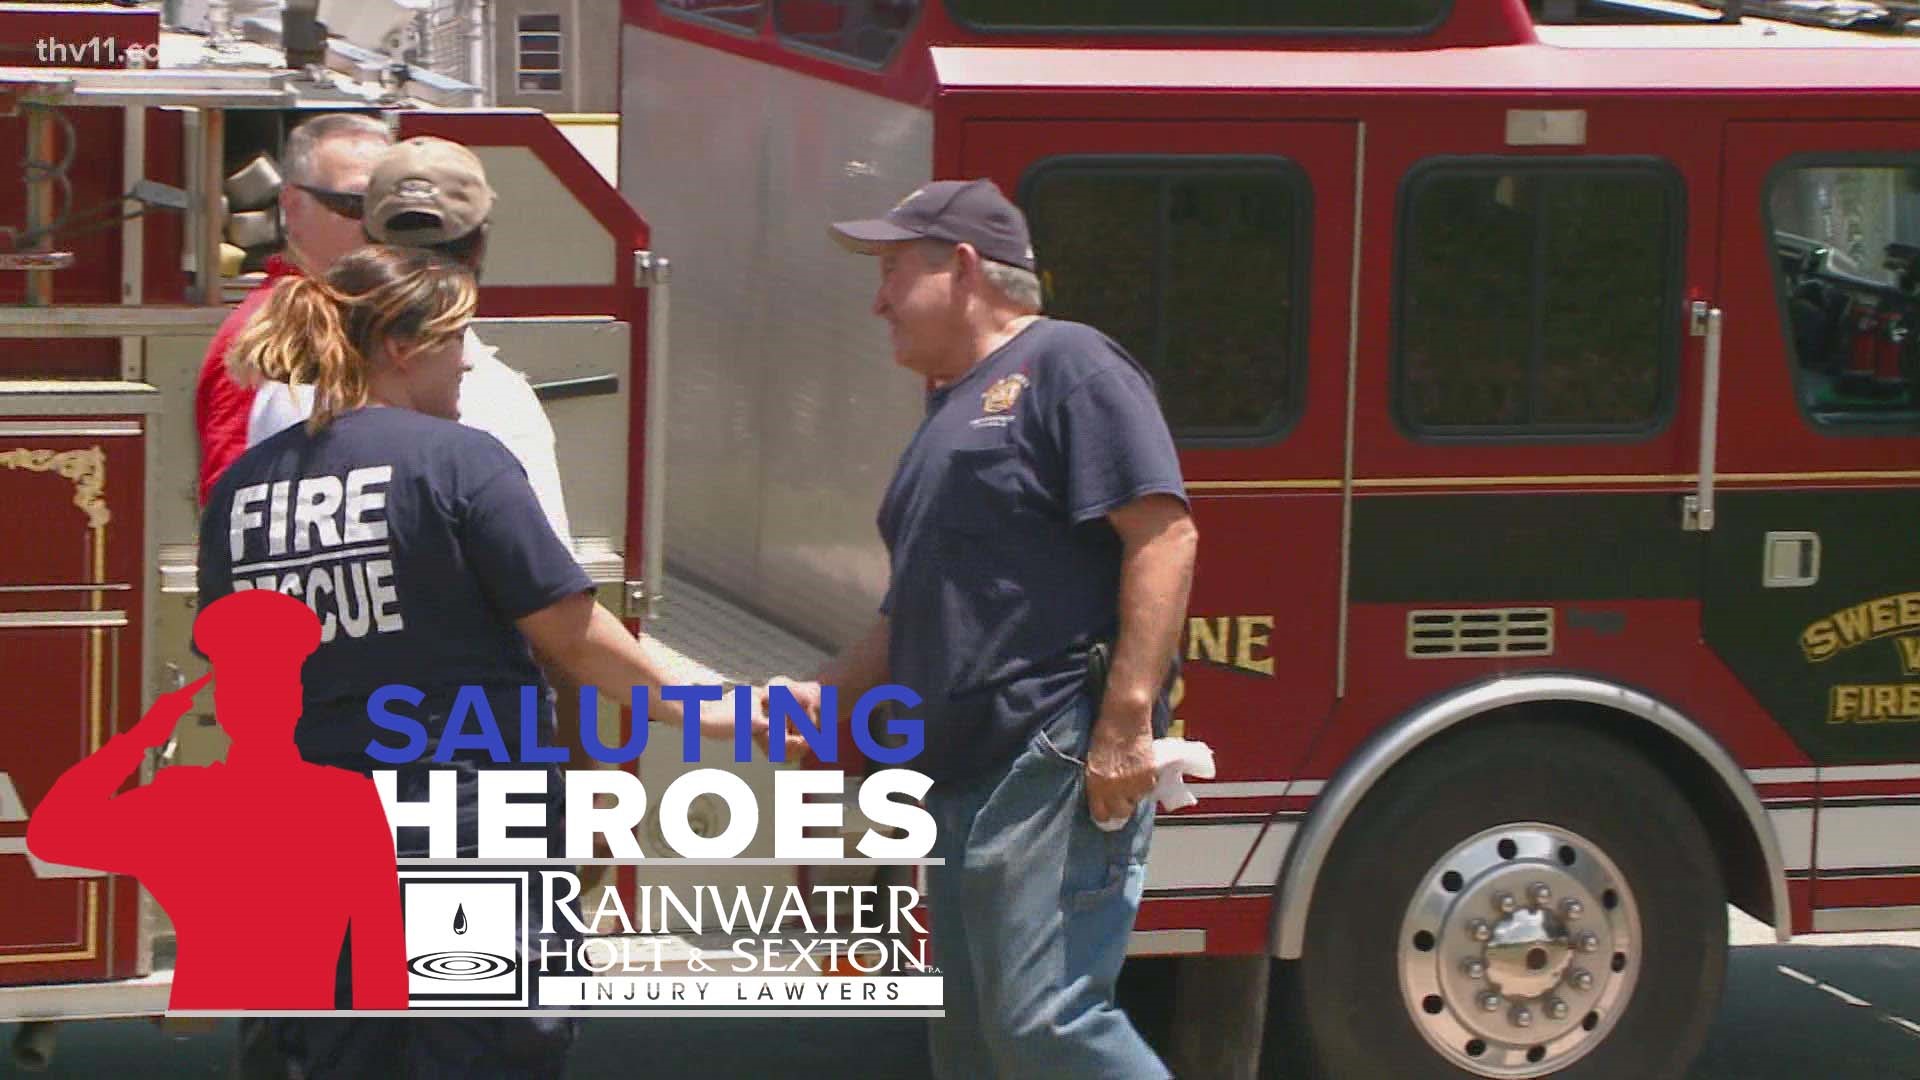 Saving lives and property by fighting fires can certainly be heroic. We're saluting members of the fire service in Pulaski County.